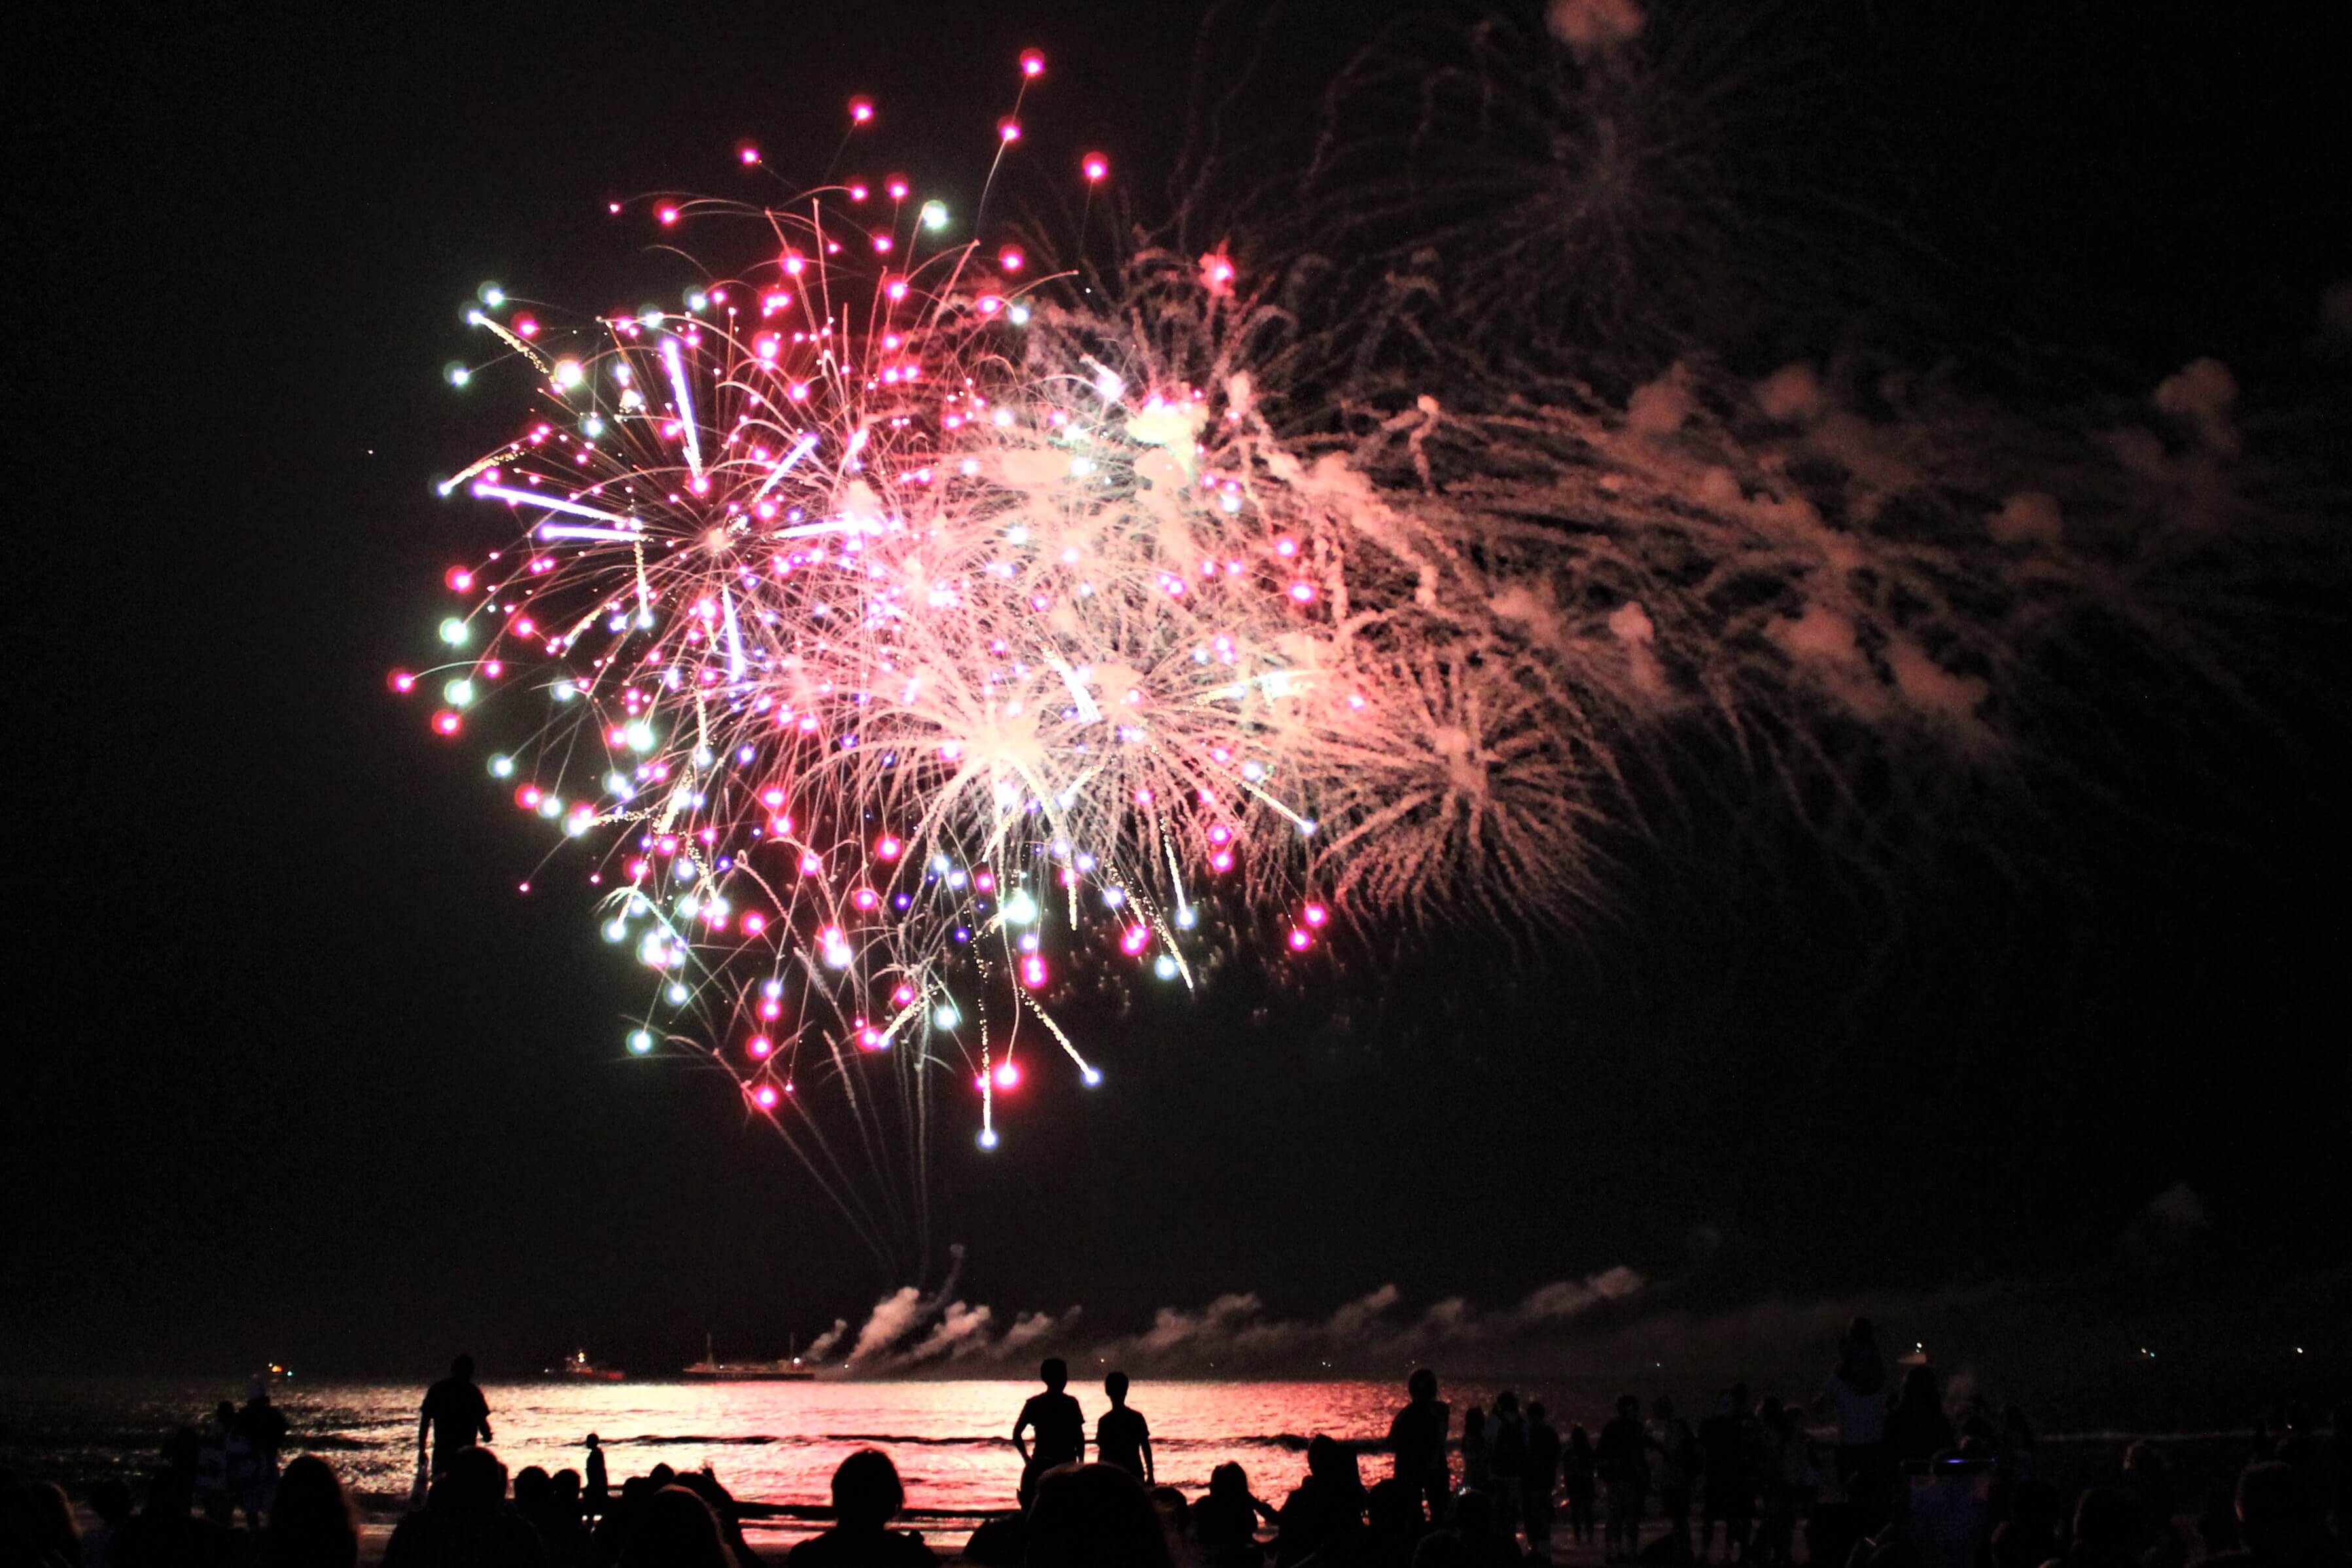 Thousands crowd the beaches and boardwalk each July 4 for Ocean City’s fireworks display. The city will not set off fireworks this year